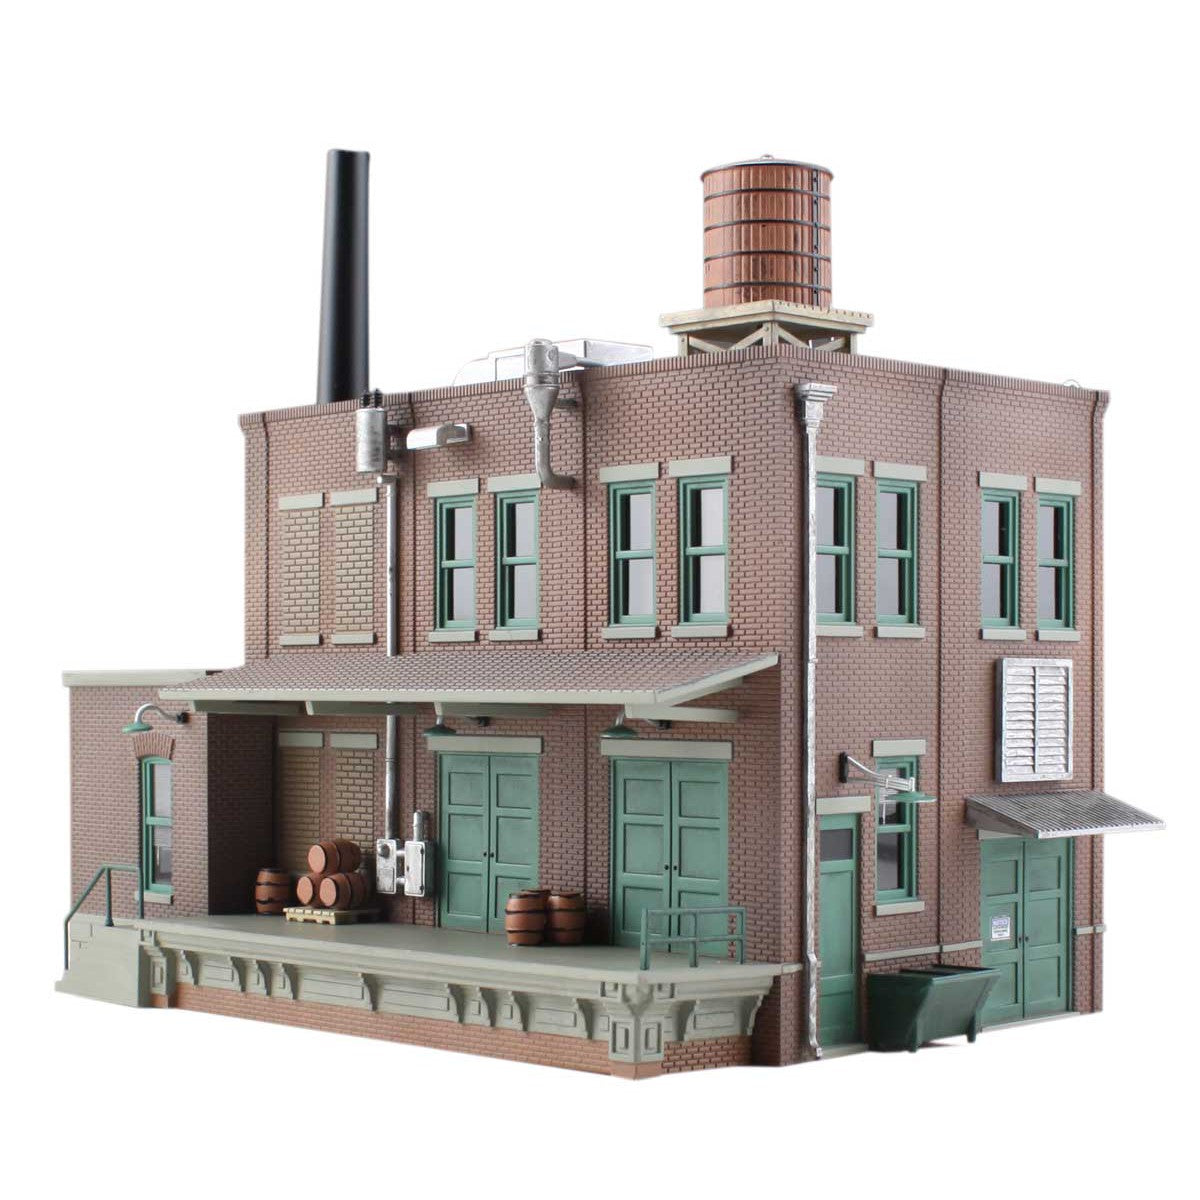 Woodland Scenics N Scale Clyde & Dale's Barrel Factory Built and Ready